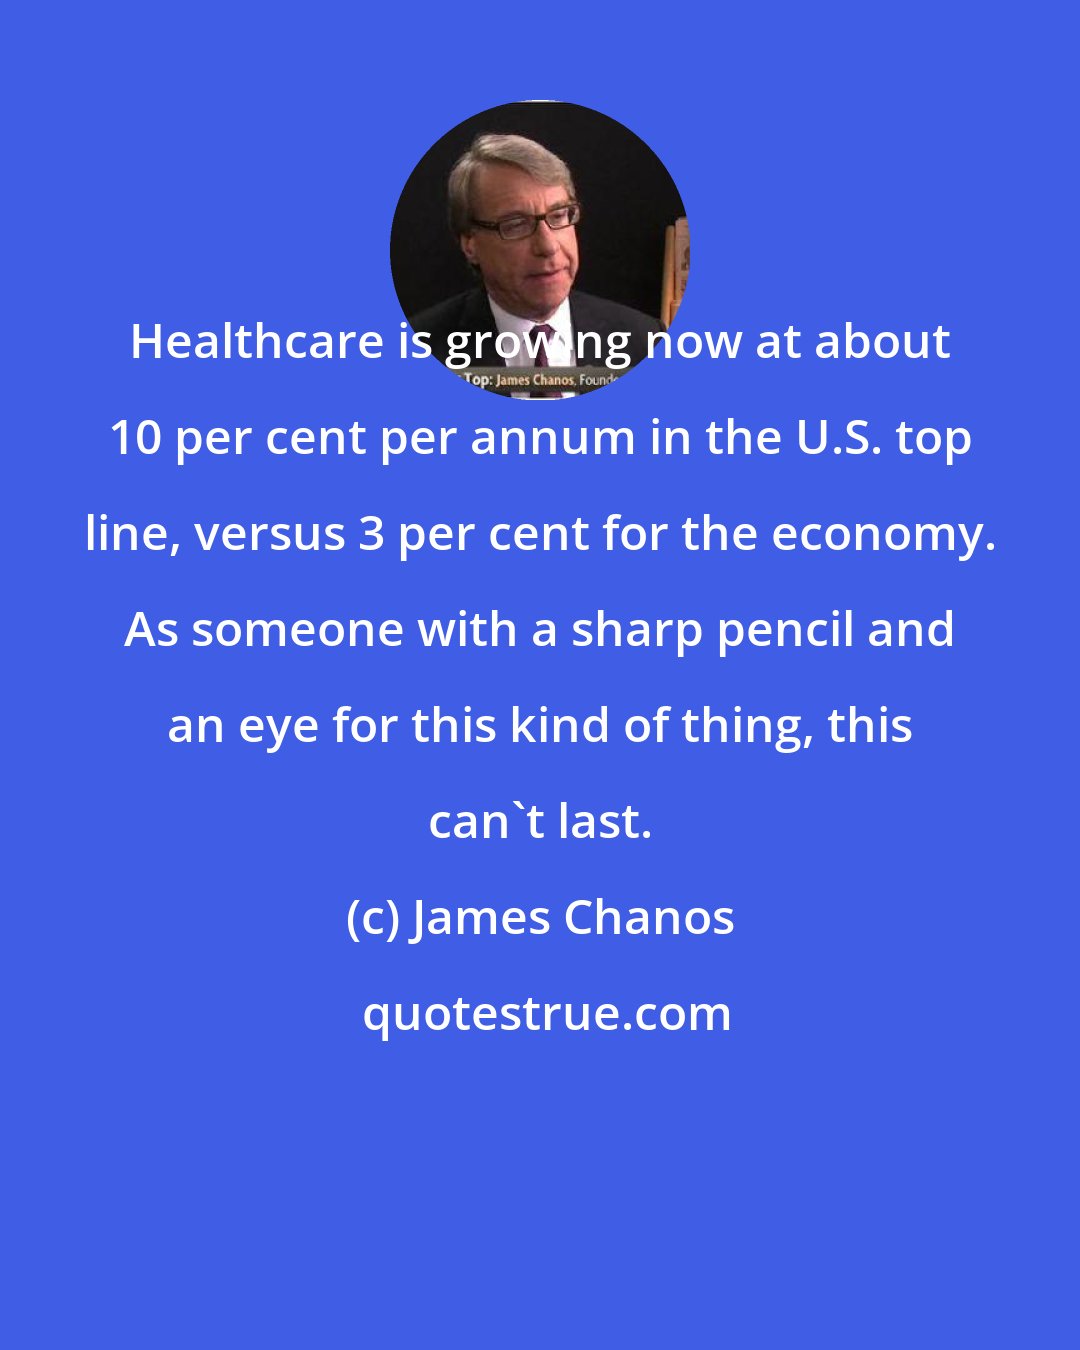 James Chanos: Healthcare is growing now at about 10 per cent per annum in the U.S. top line, versus 3 per cent for the economy. As someone with a sharp pencil and an eye for this kind of thing, this can't last.